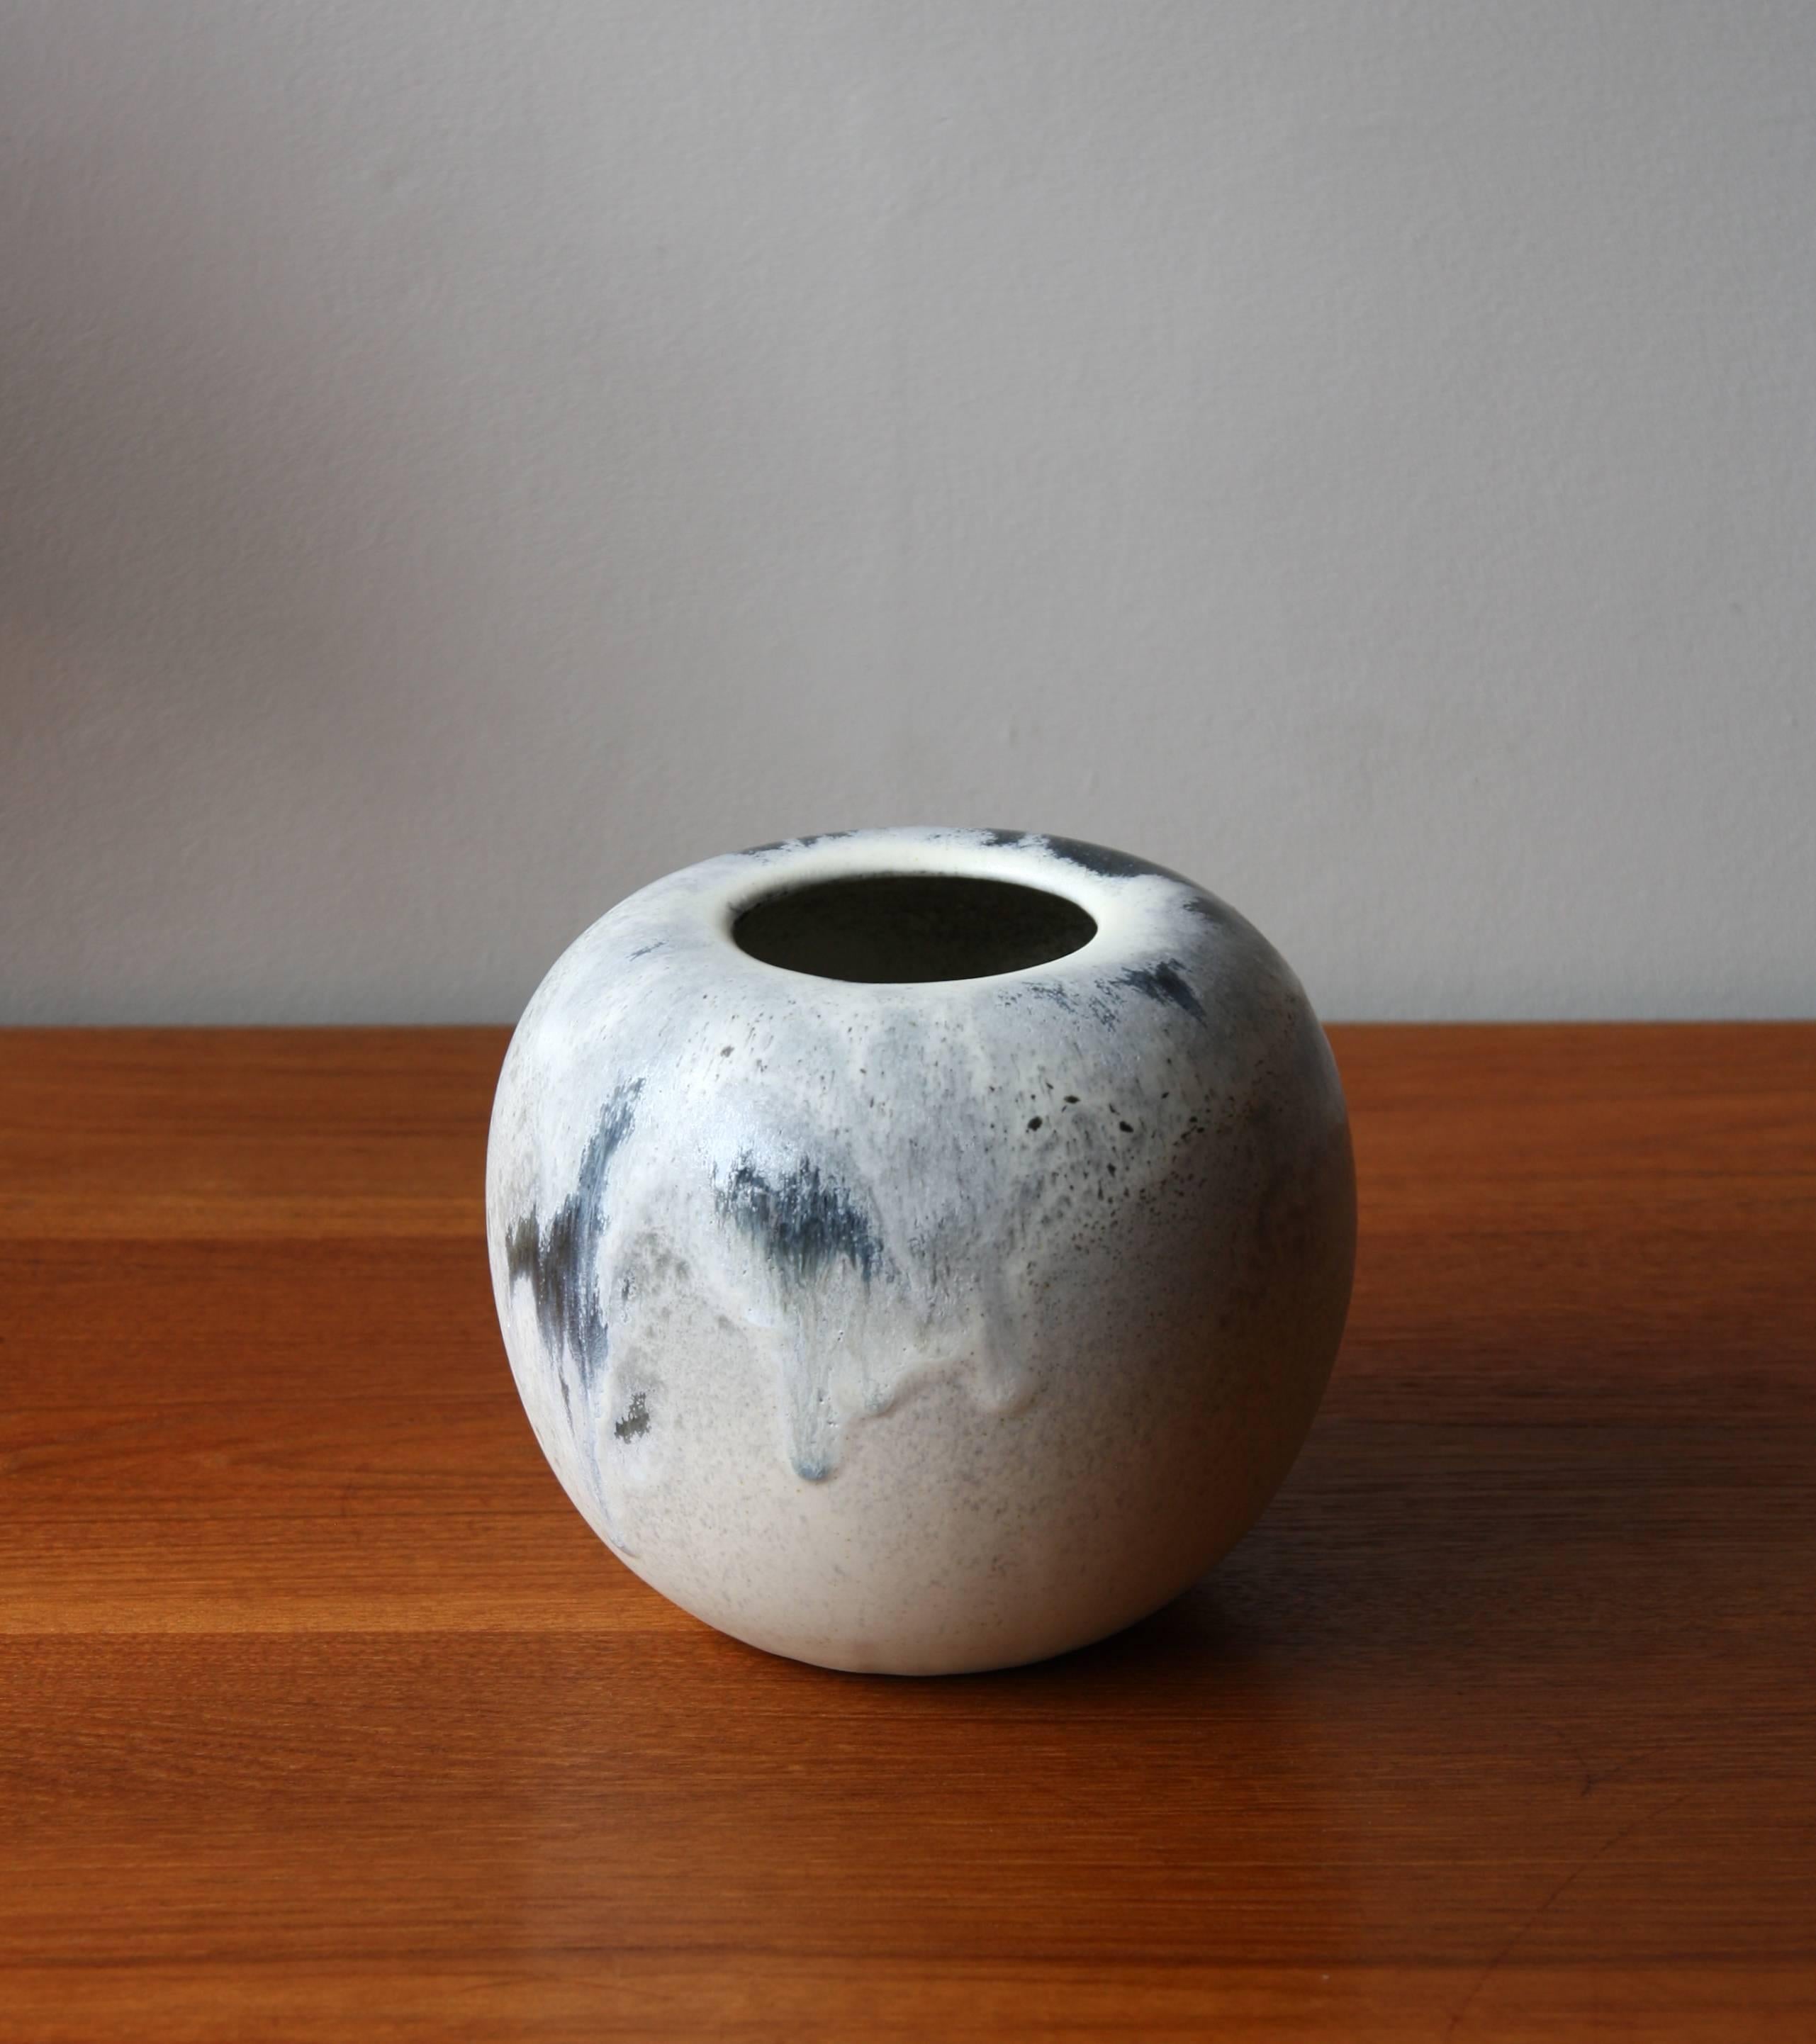 Thrown, fired and glazed by hand in a tiny workshop just outside Copenhagen, Würtz's ceramics are inspired both by Scandinavian utilitarian crafts traditions and 20th century British Studio Pottery. The artisan duo, formed of father Åge and son